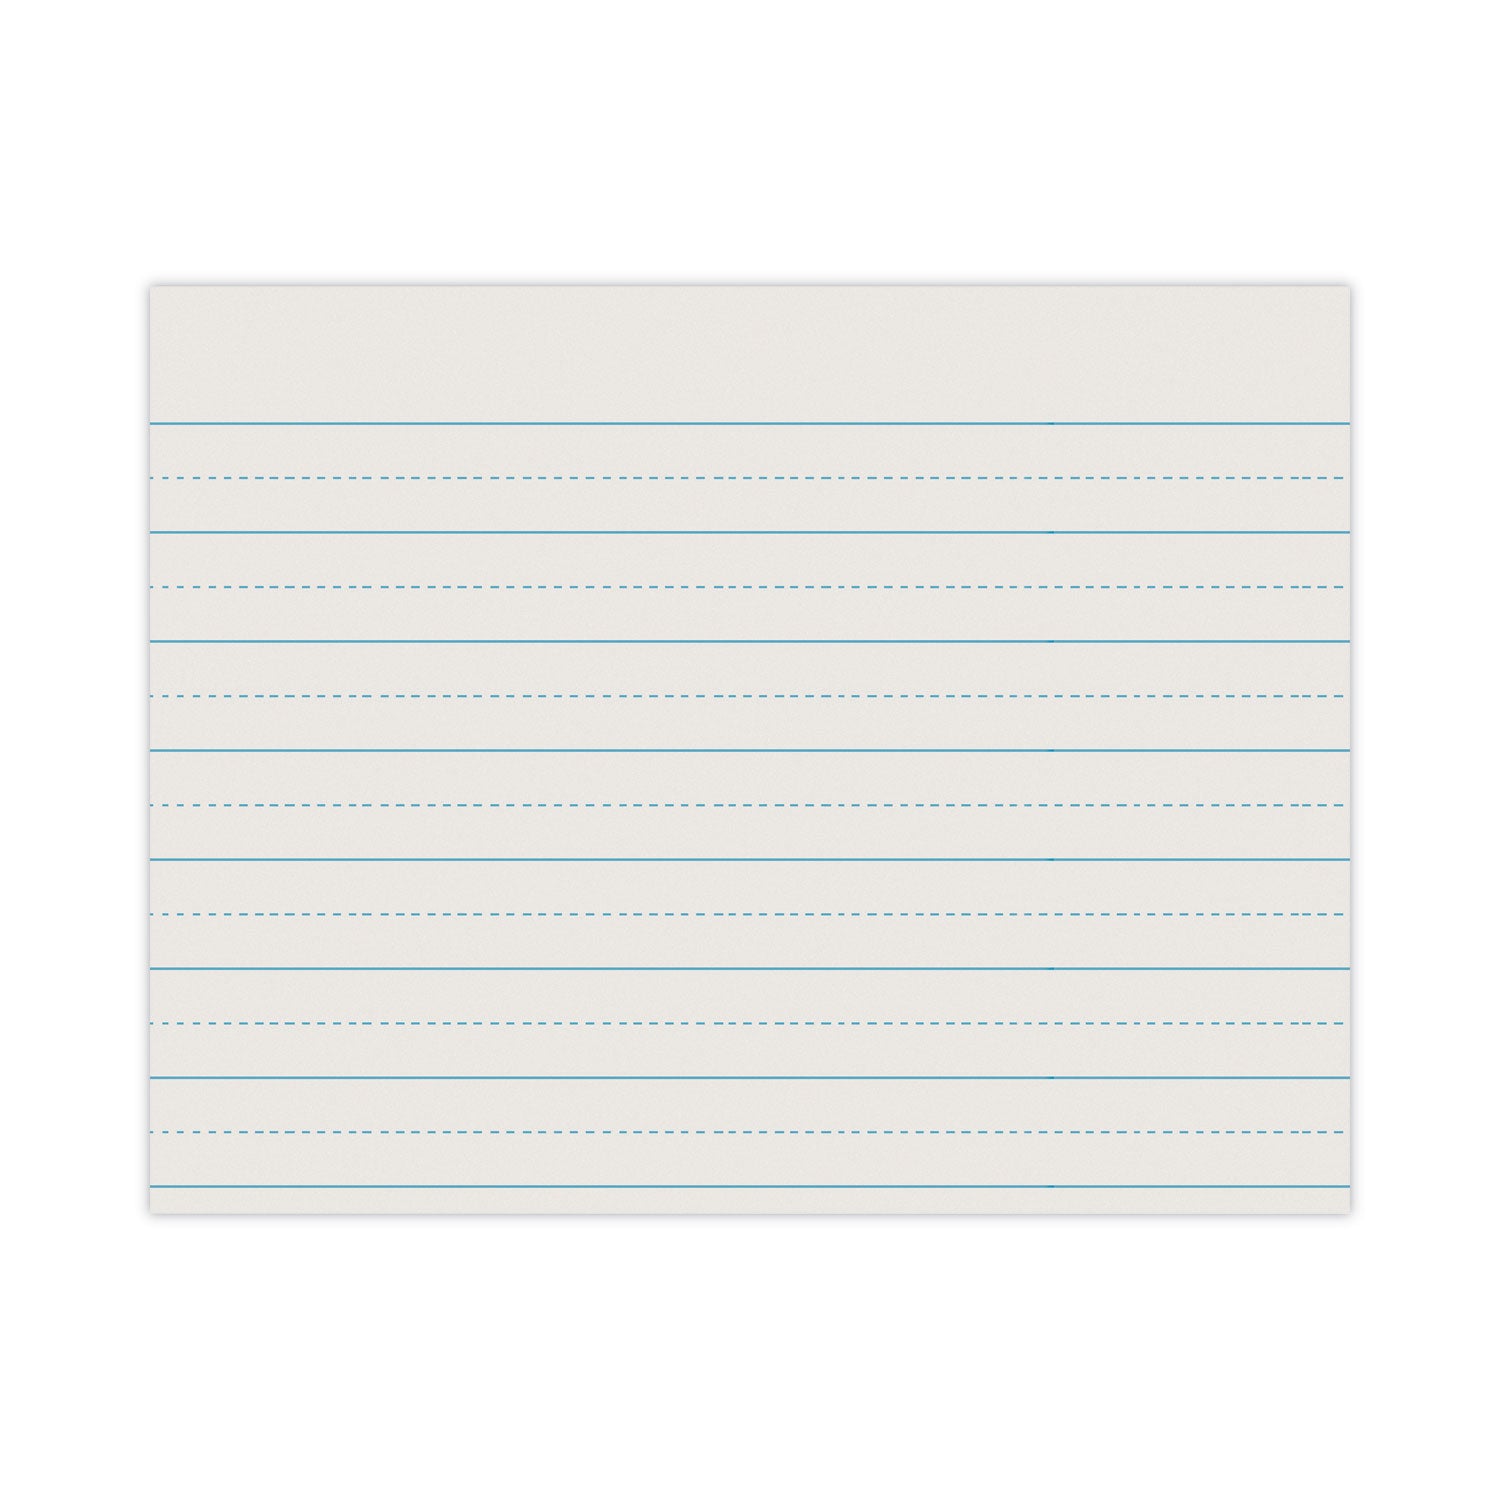 Alternate Dotted Newsprint Paper, 1" Two-Sided Long Rule, 8.5 x 11, 500/Pack - 